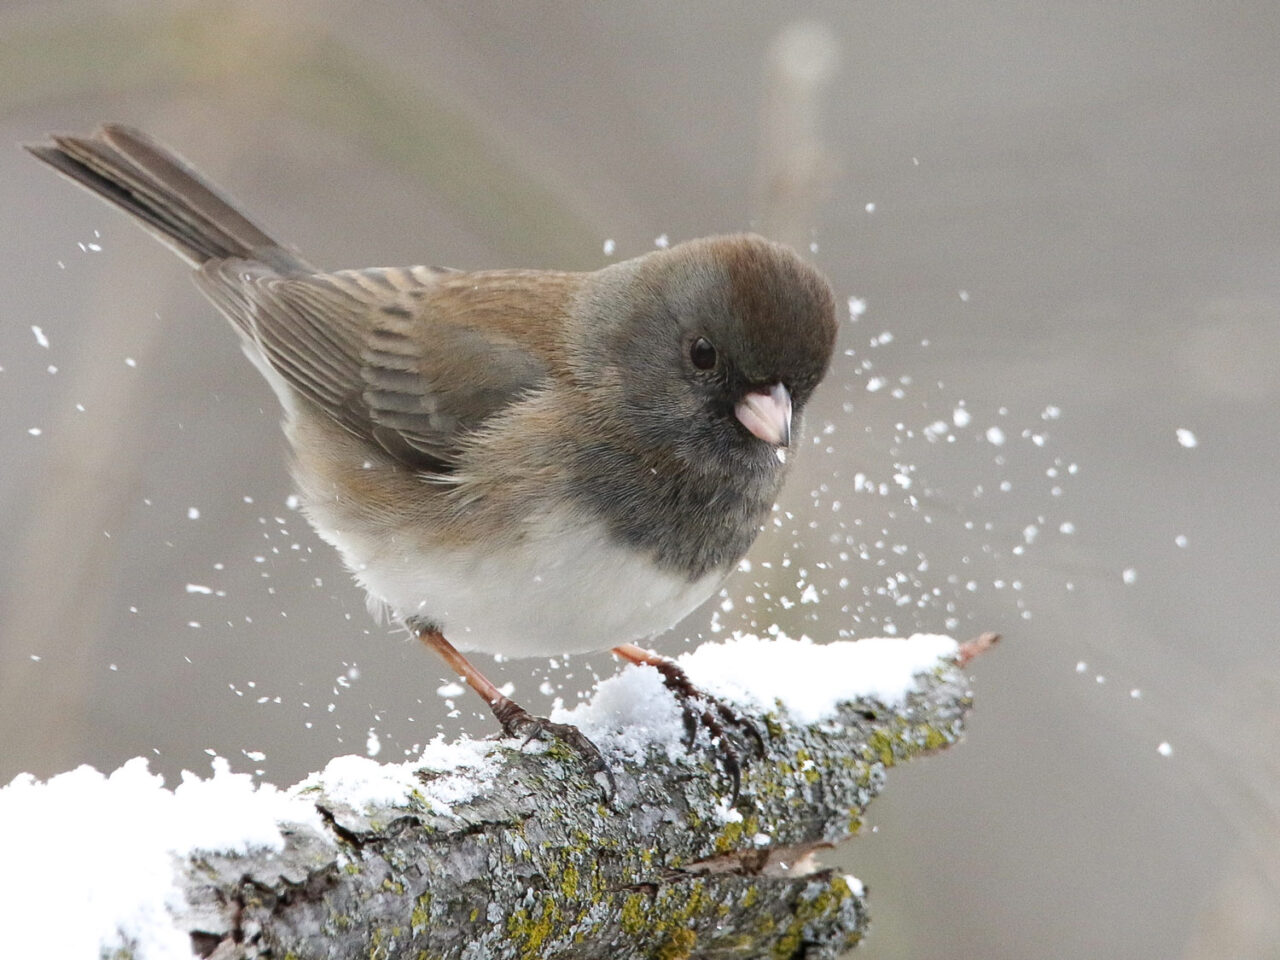 A sparrow kicks up some snow from its perch.